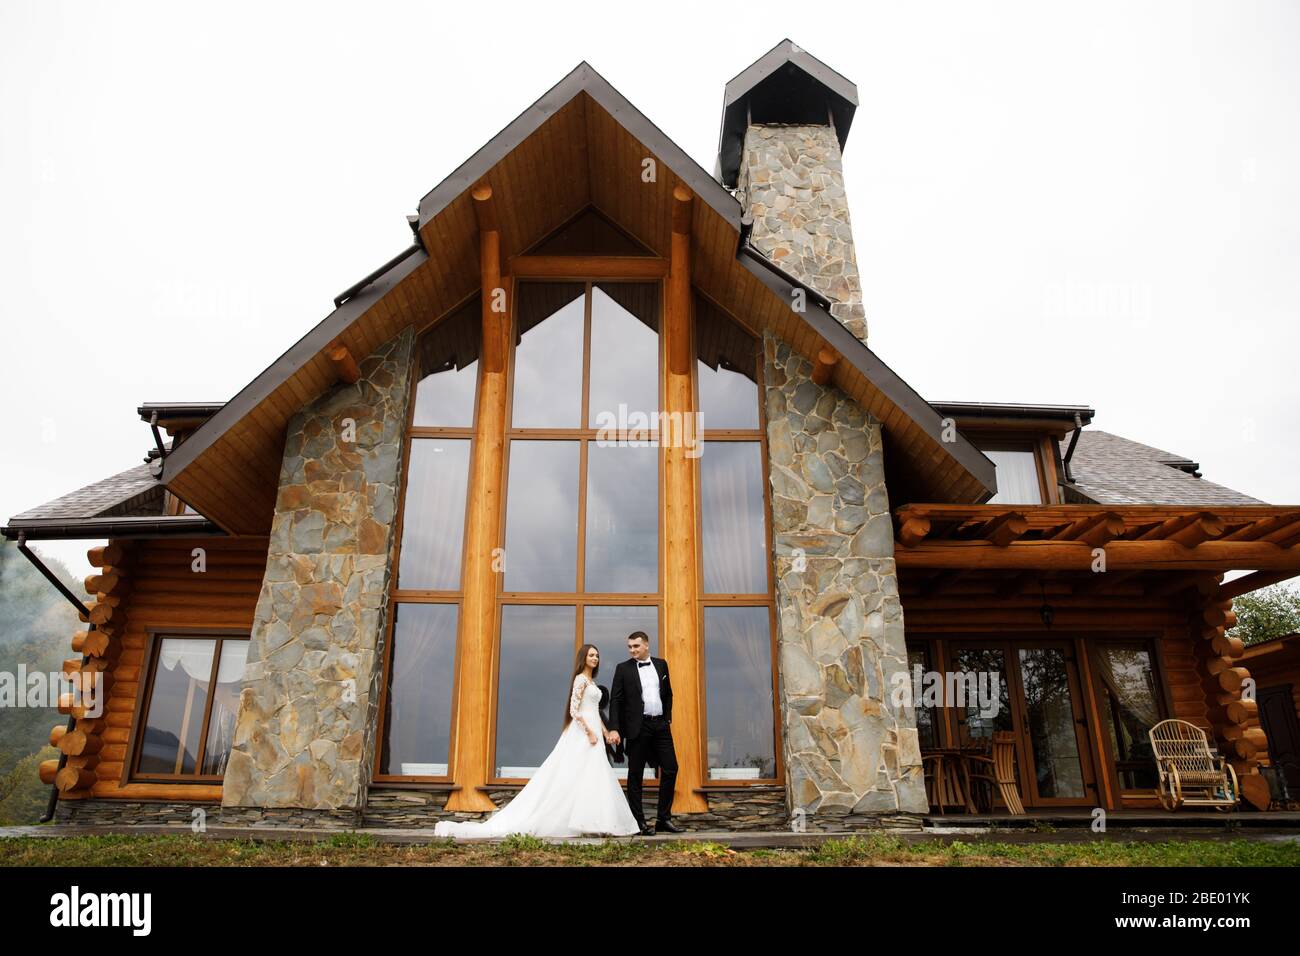 A woman in a wedding dress and a man in a stylish suit stand in front of a gorgeous house in the mountains Stock Photo